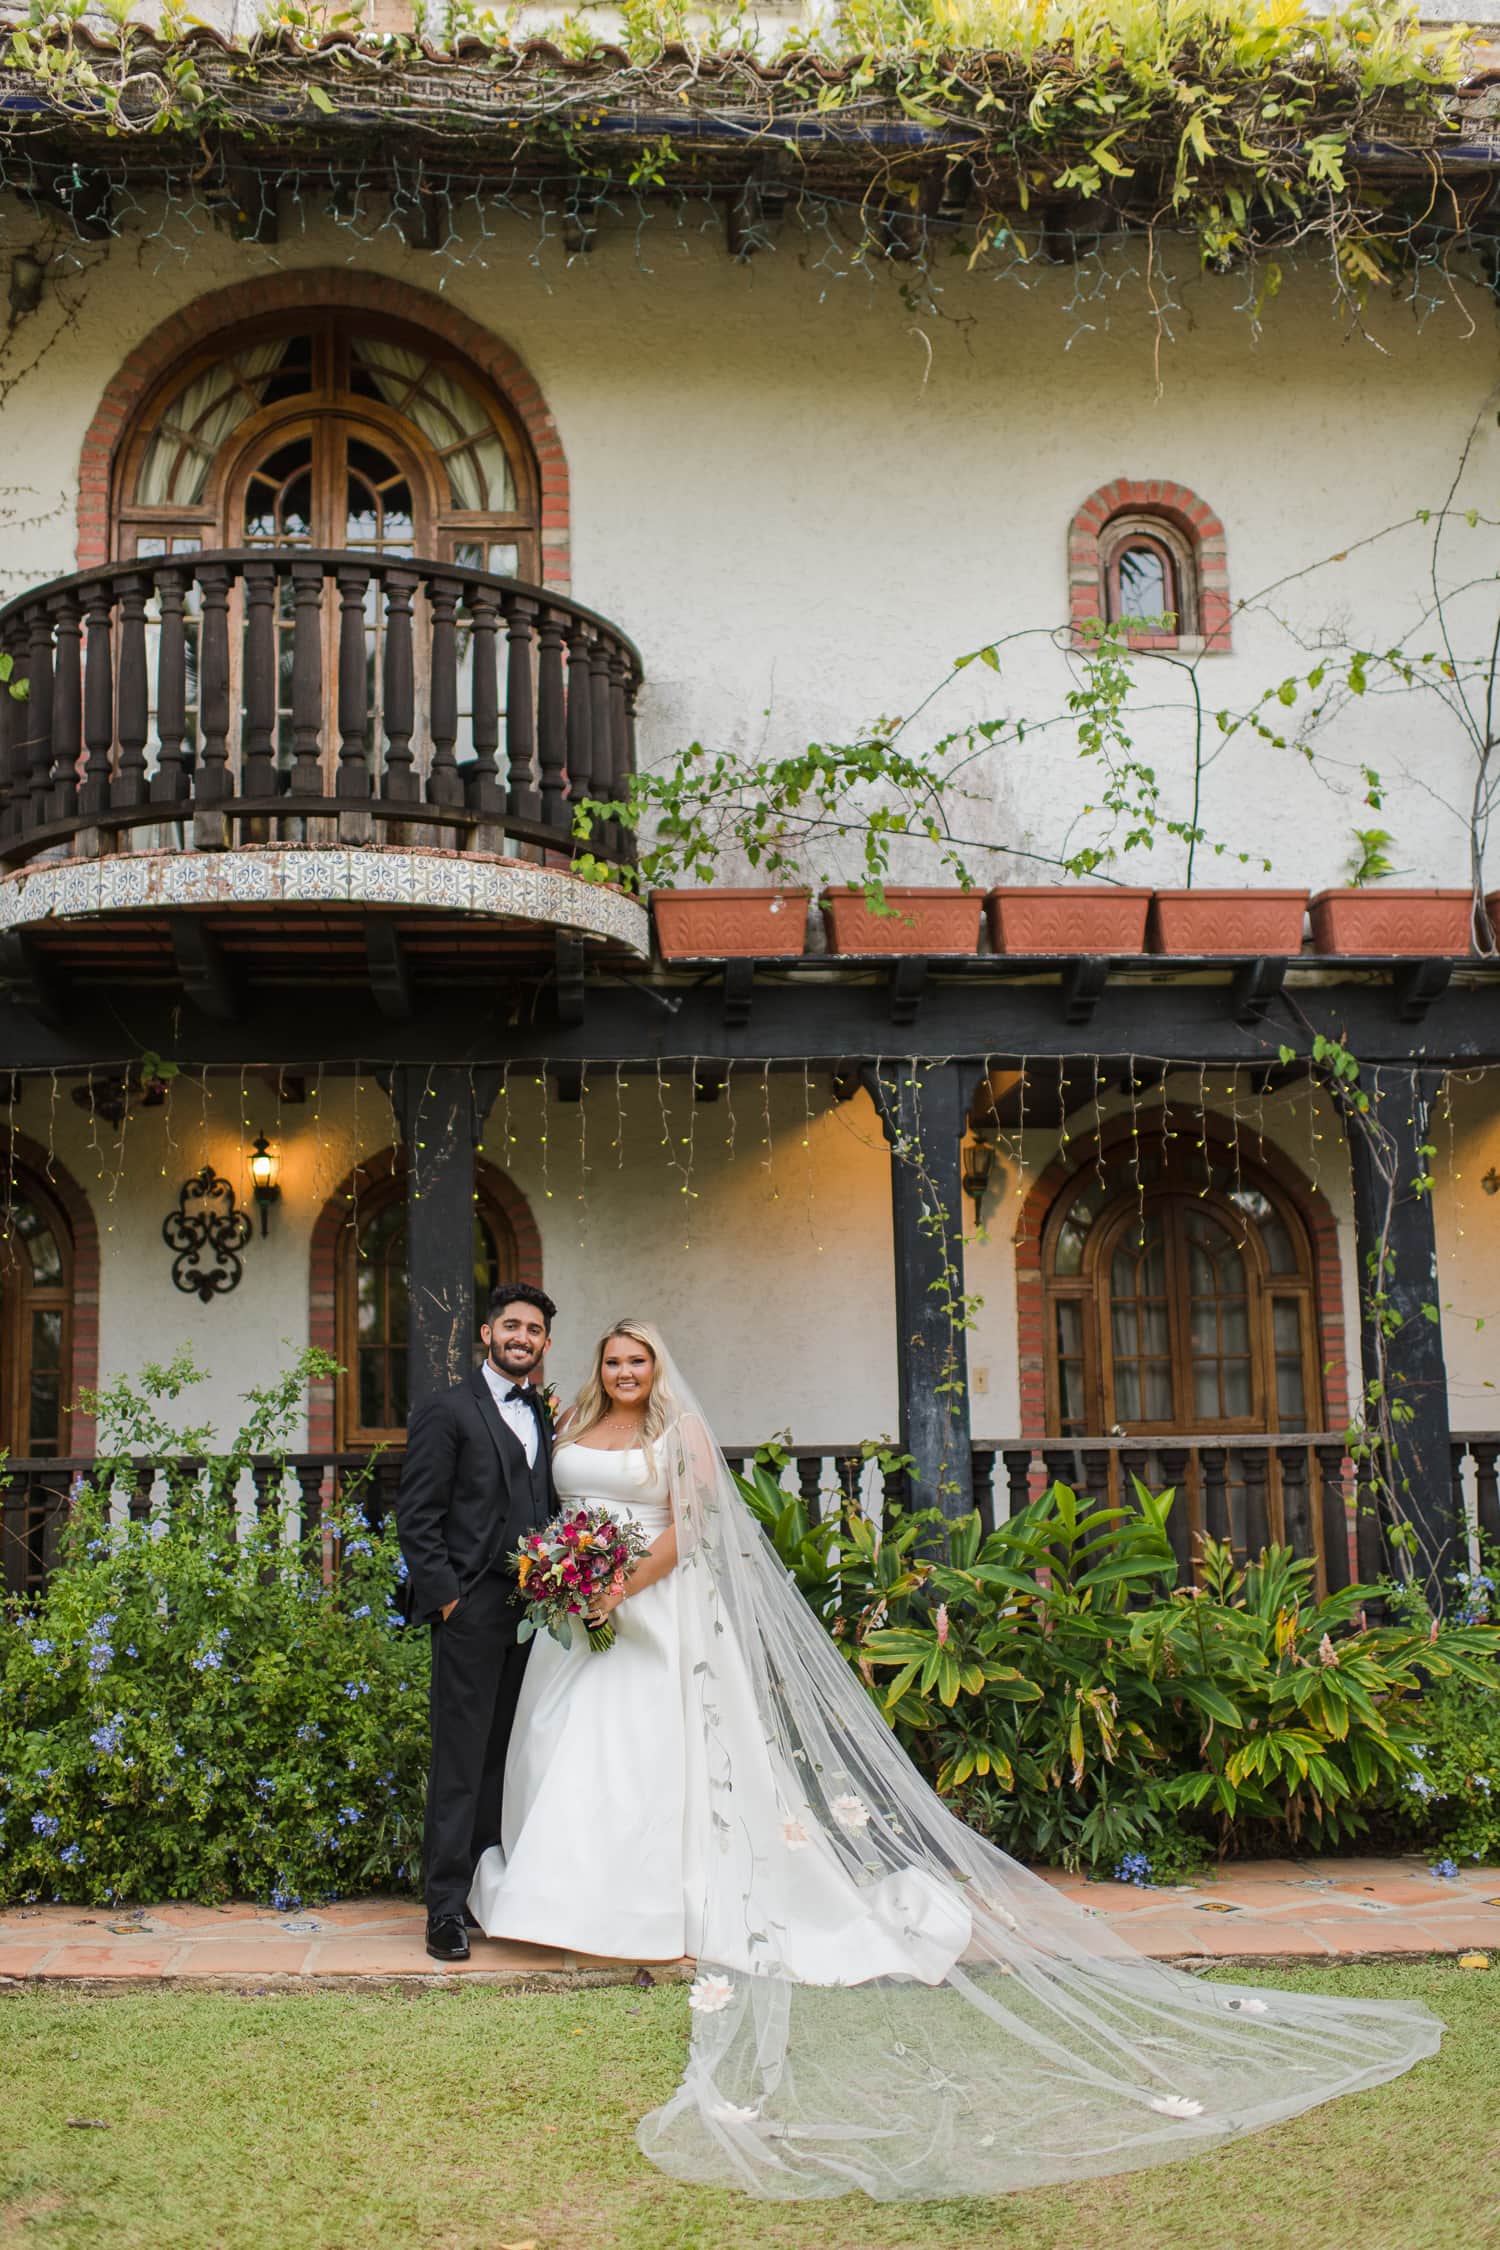 Relive the beauty of a wildflower wedding at Hacienda Siesta Alegre. We captured a high school sweetheart love story through vivid florals and customized decor.